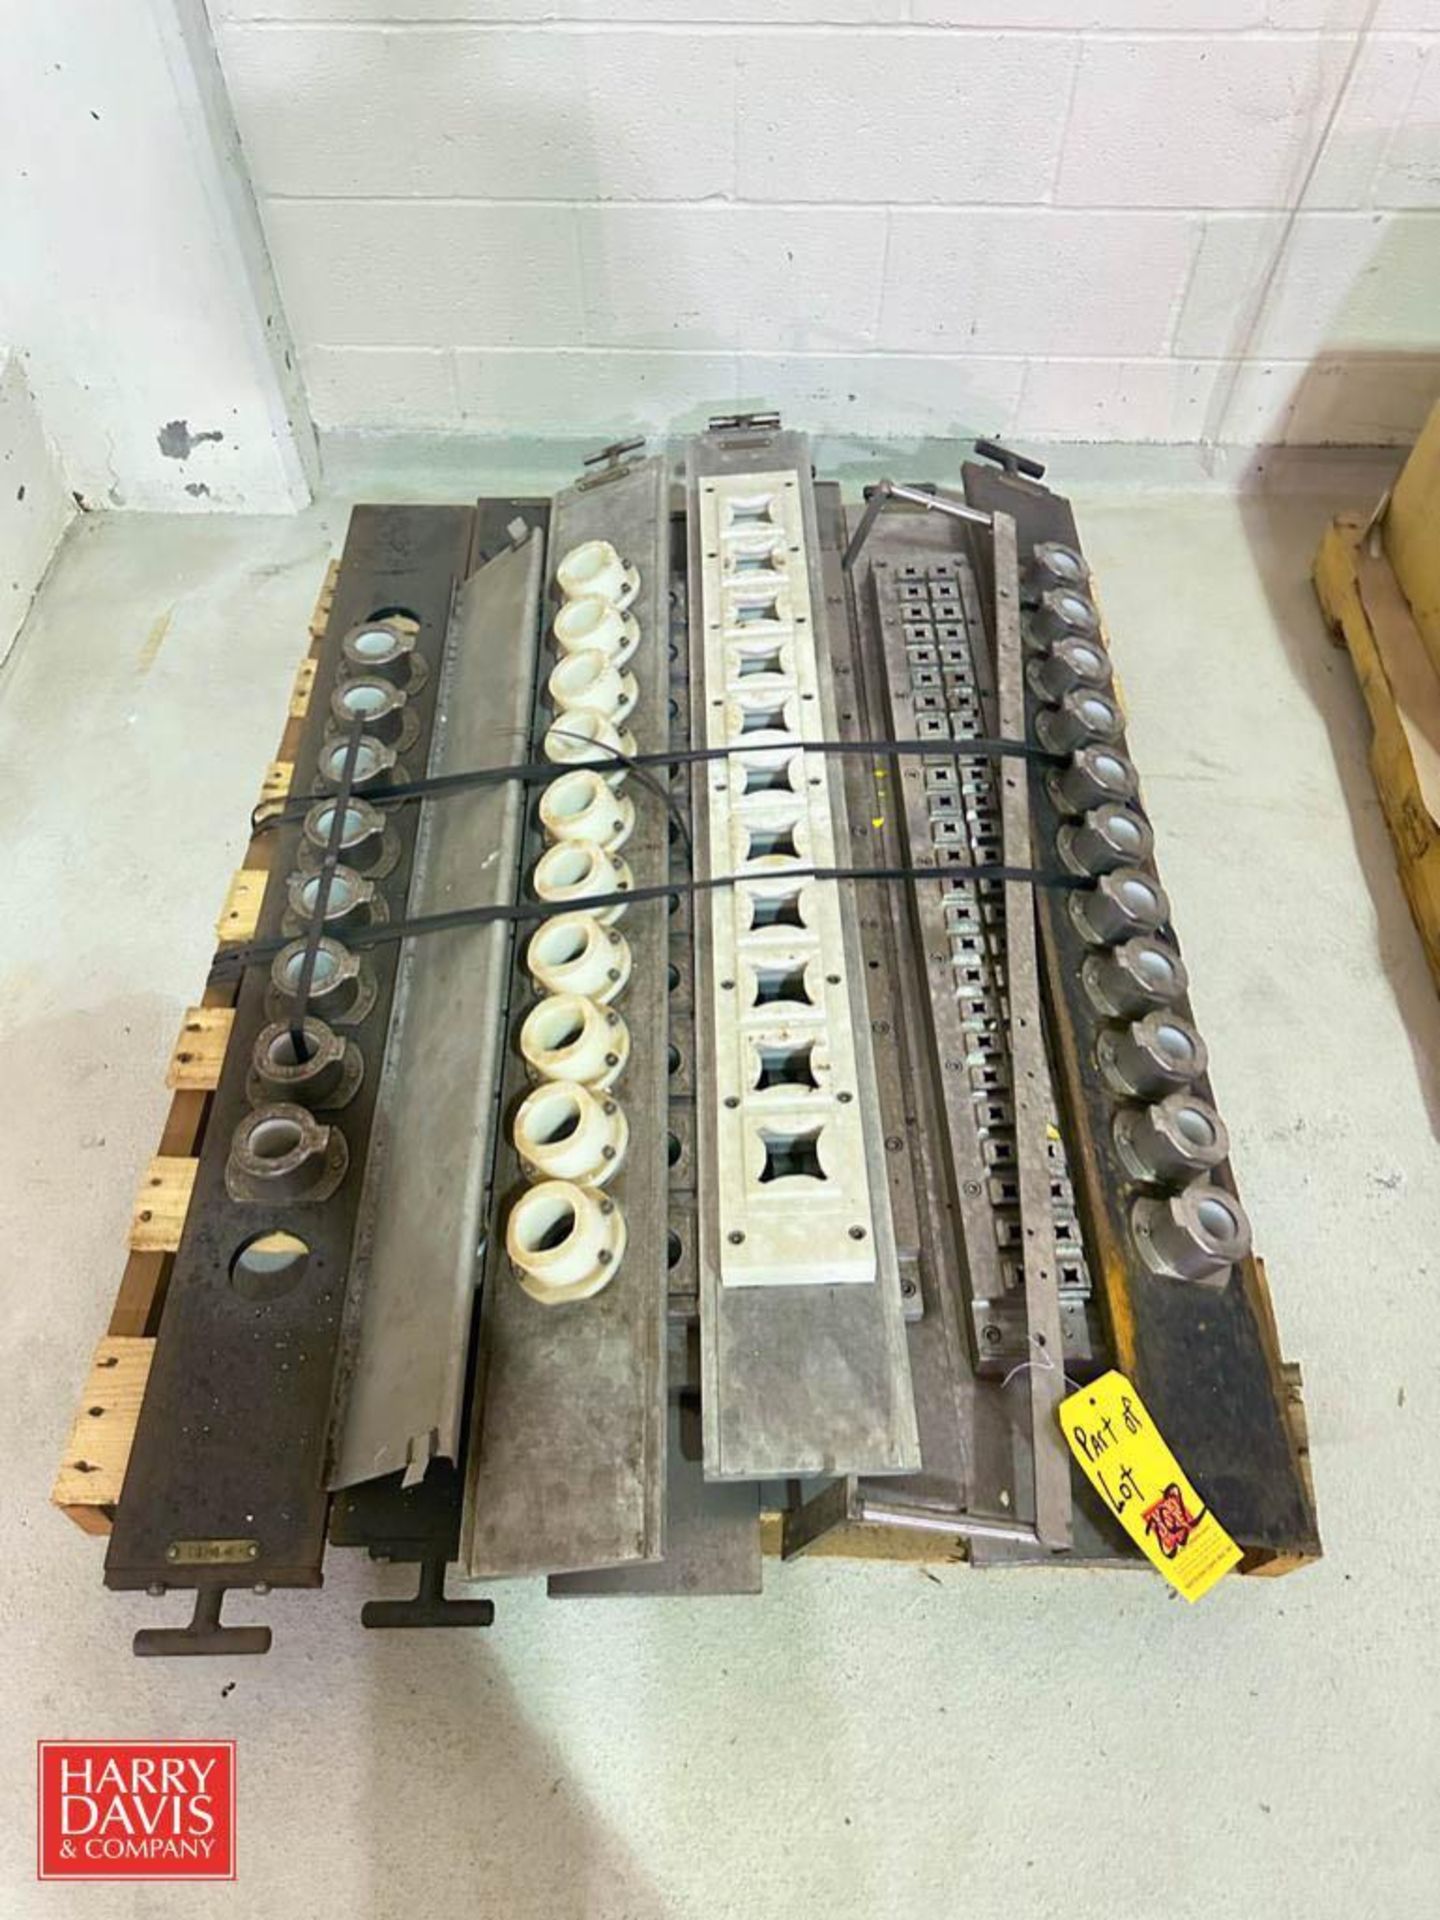 Assorted Inline S/S Depositor Manifolds - Rigging Fee: $400 - Image 2 of 2